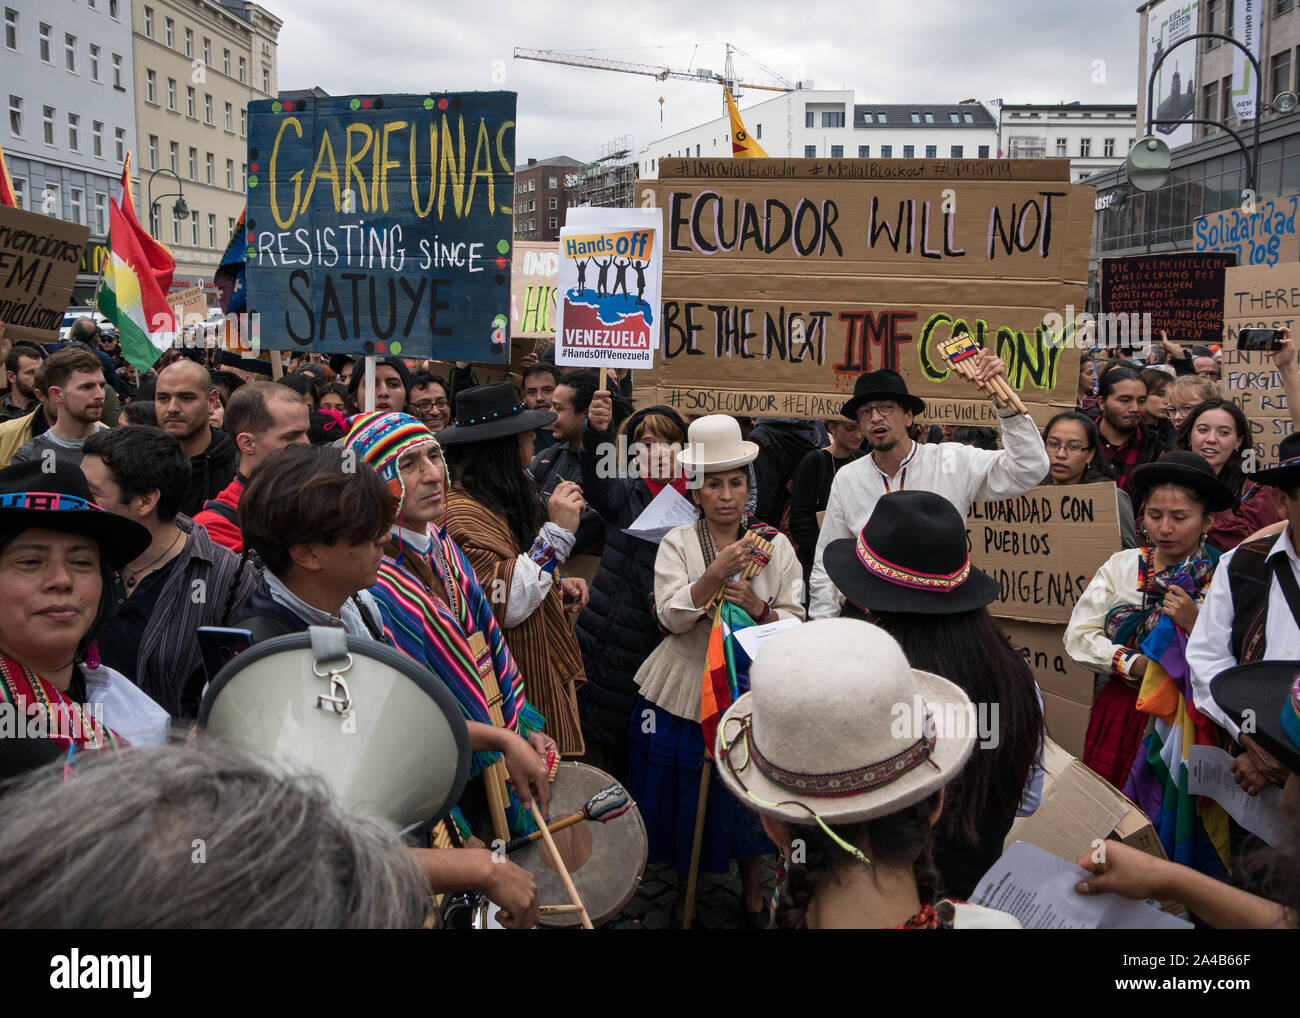 Demostration and protest against President Moreno's politics in Ecuador, crowd of people in traditional clothes showing banners while playing music Stock Photo